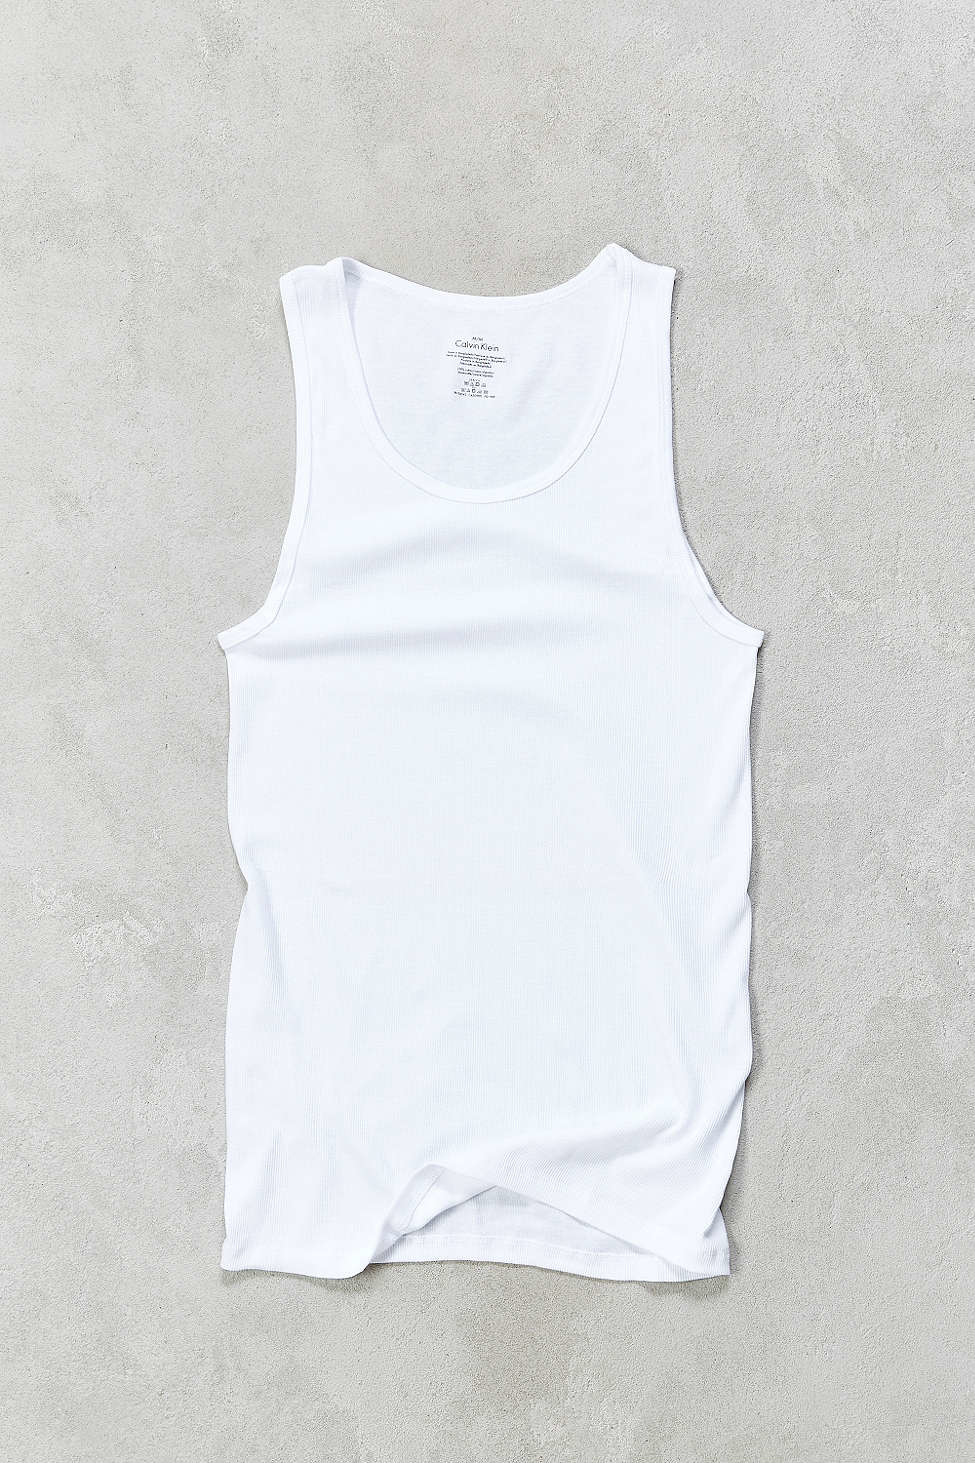 Calvin Klein Cotton Ribbed Tank Top 3-pack in White for Men - Lyst